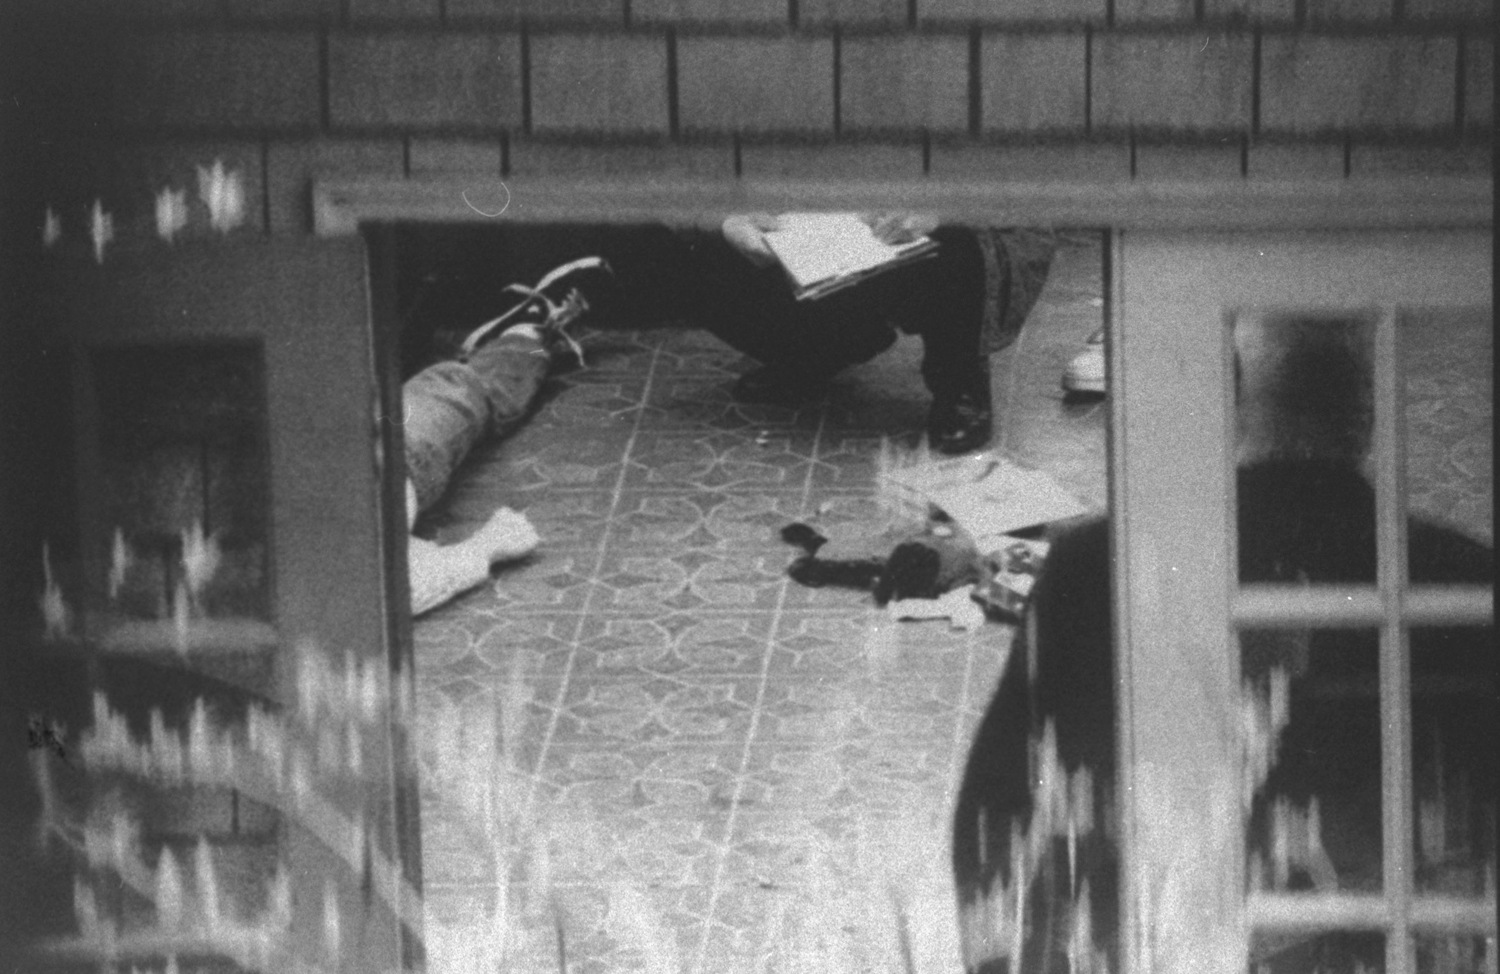 Investigators examine the body of Kurt Cobain in a room atop the garage of his Seattle home, April 8, 1994.